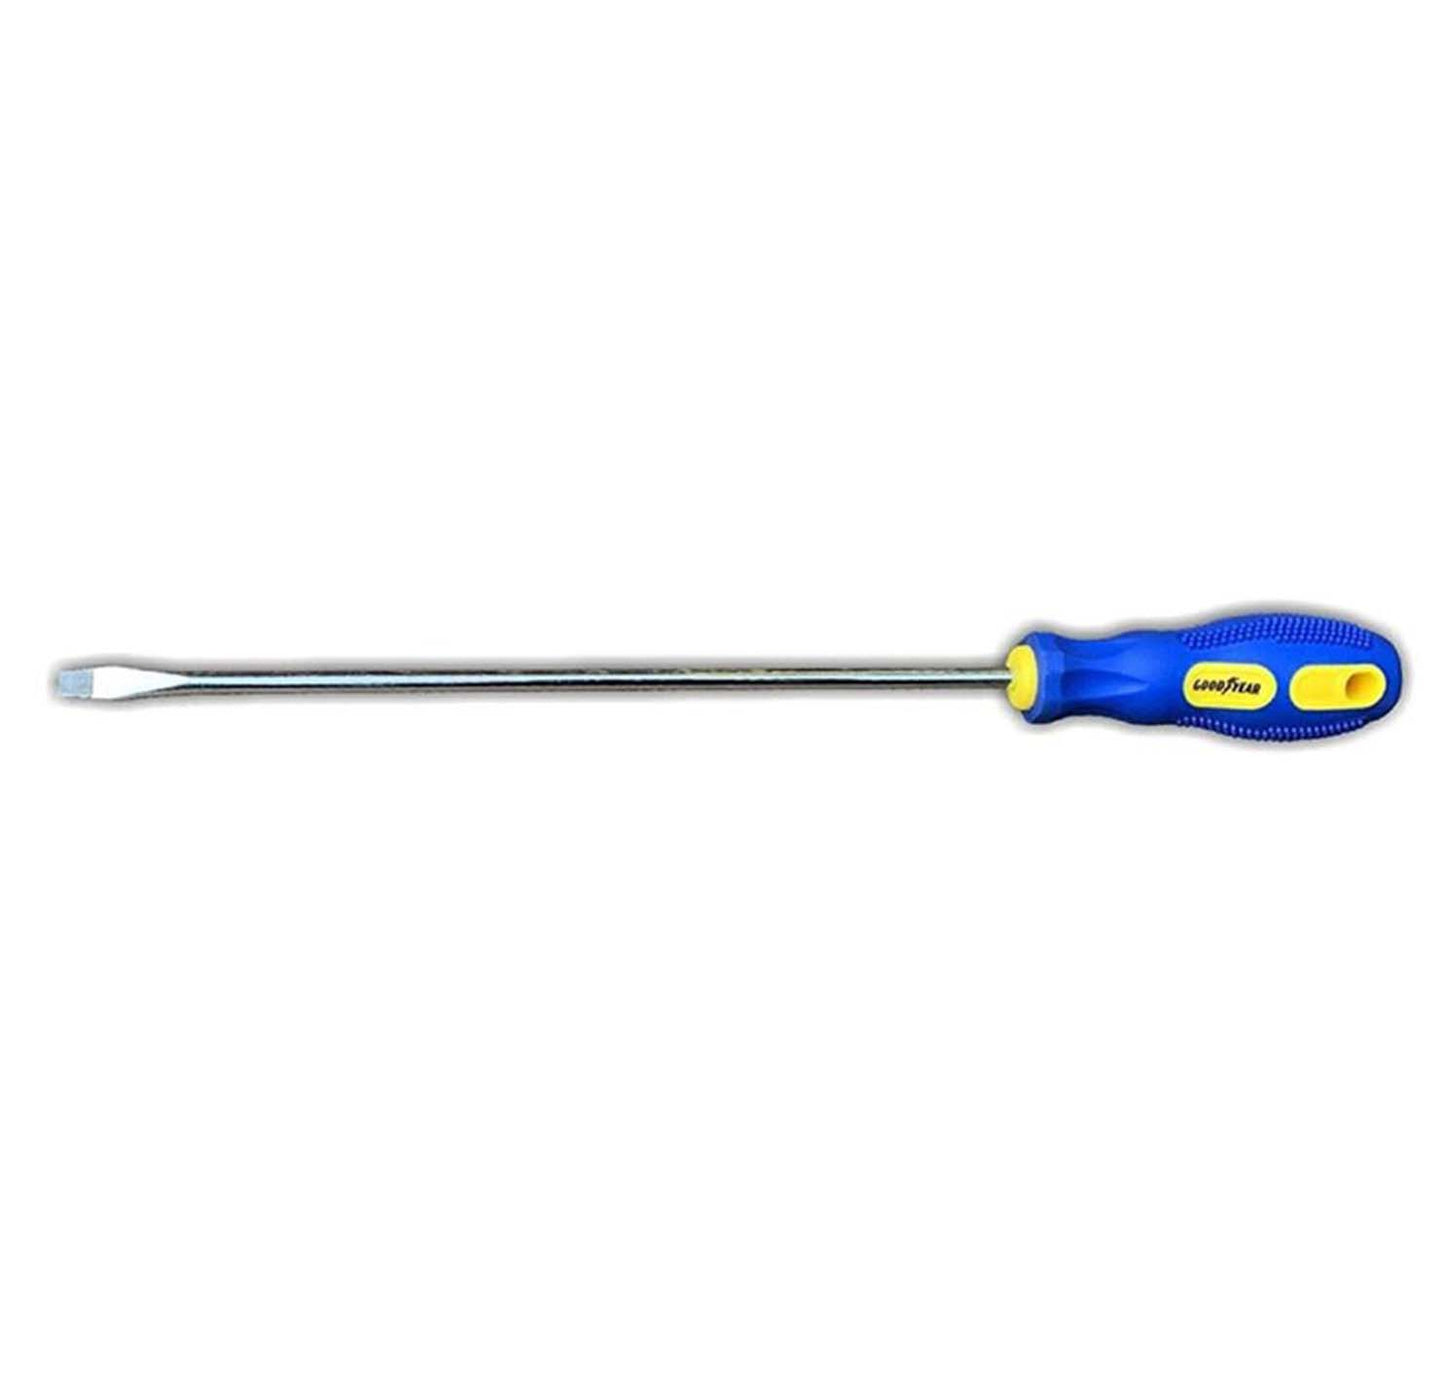 Goodyear Screwdriver Flat Head With Dual Colour Confortable Grip - 6mm Rod Size